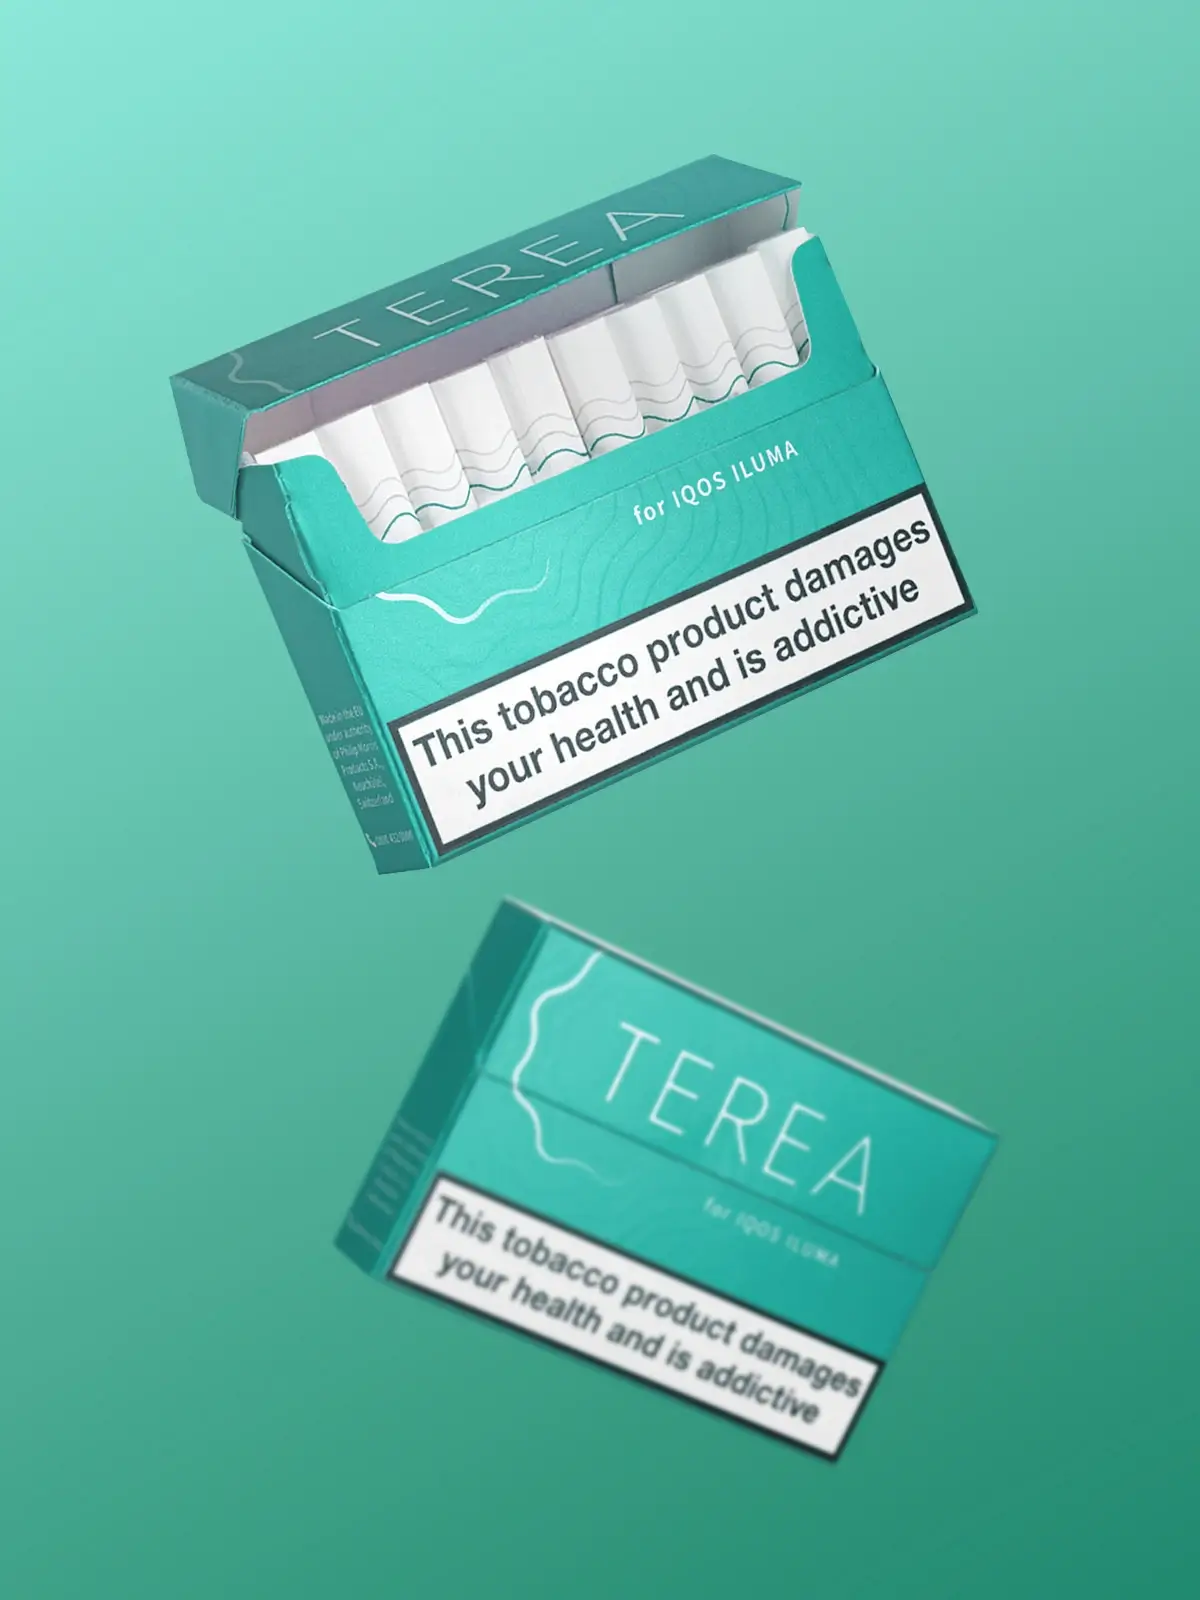 Two packs of IQOS TEREA Turquoise floating in front of a blue/green/turquoise background